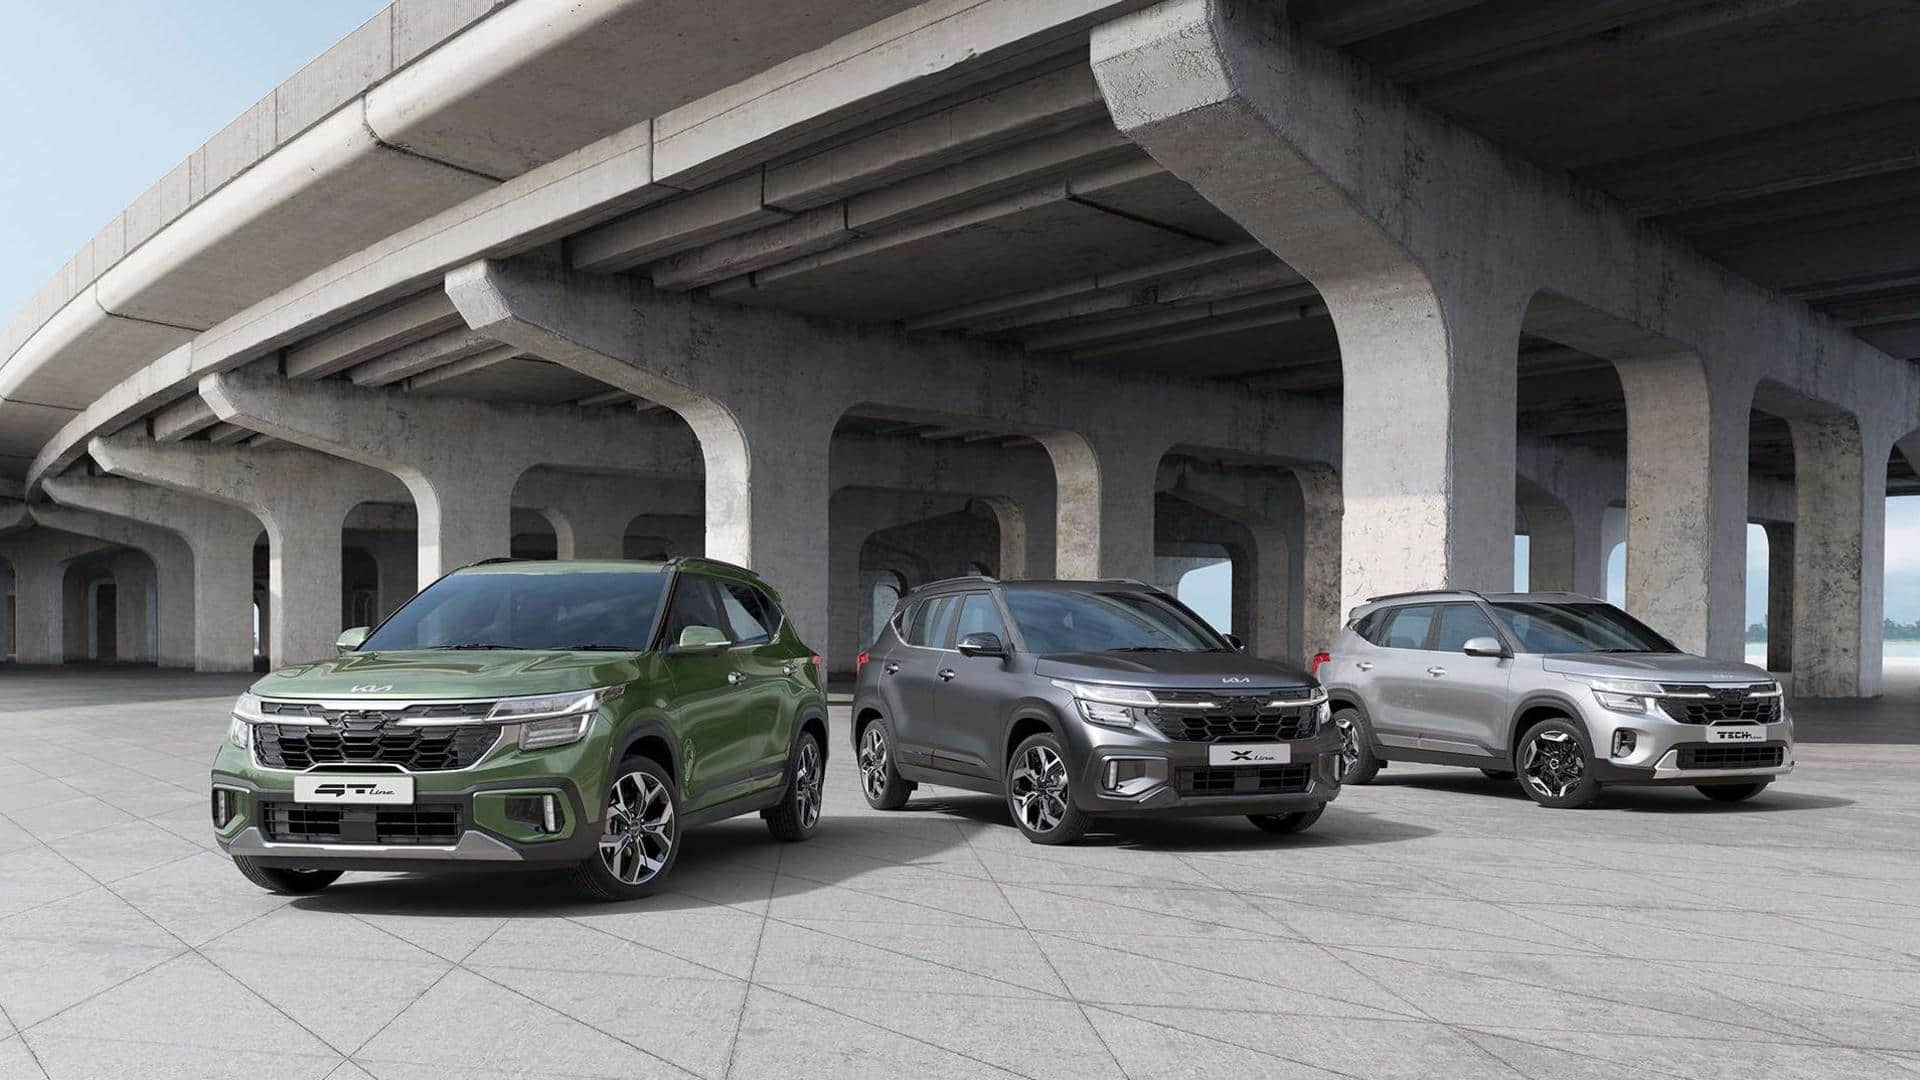 2023 Kia Seltos variants explained: Which one offers best value 